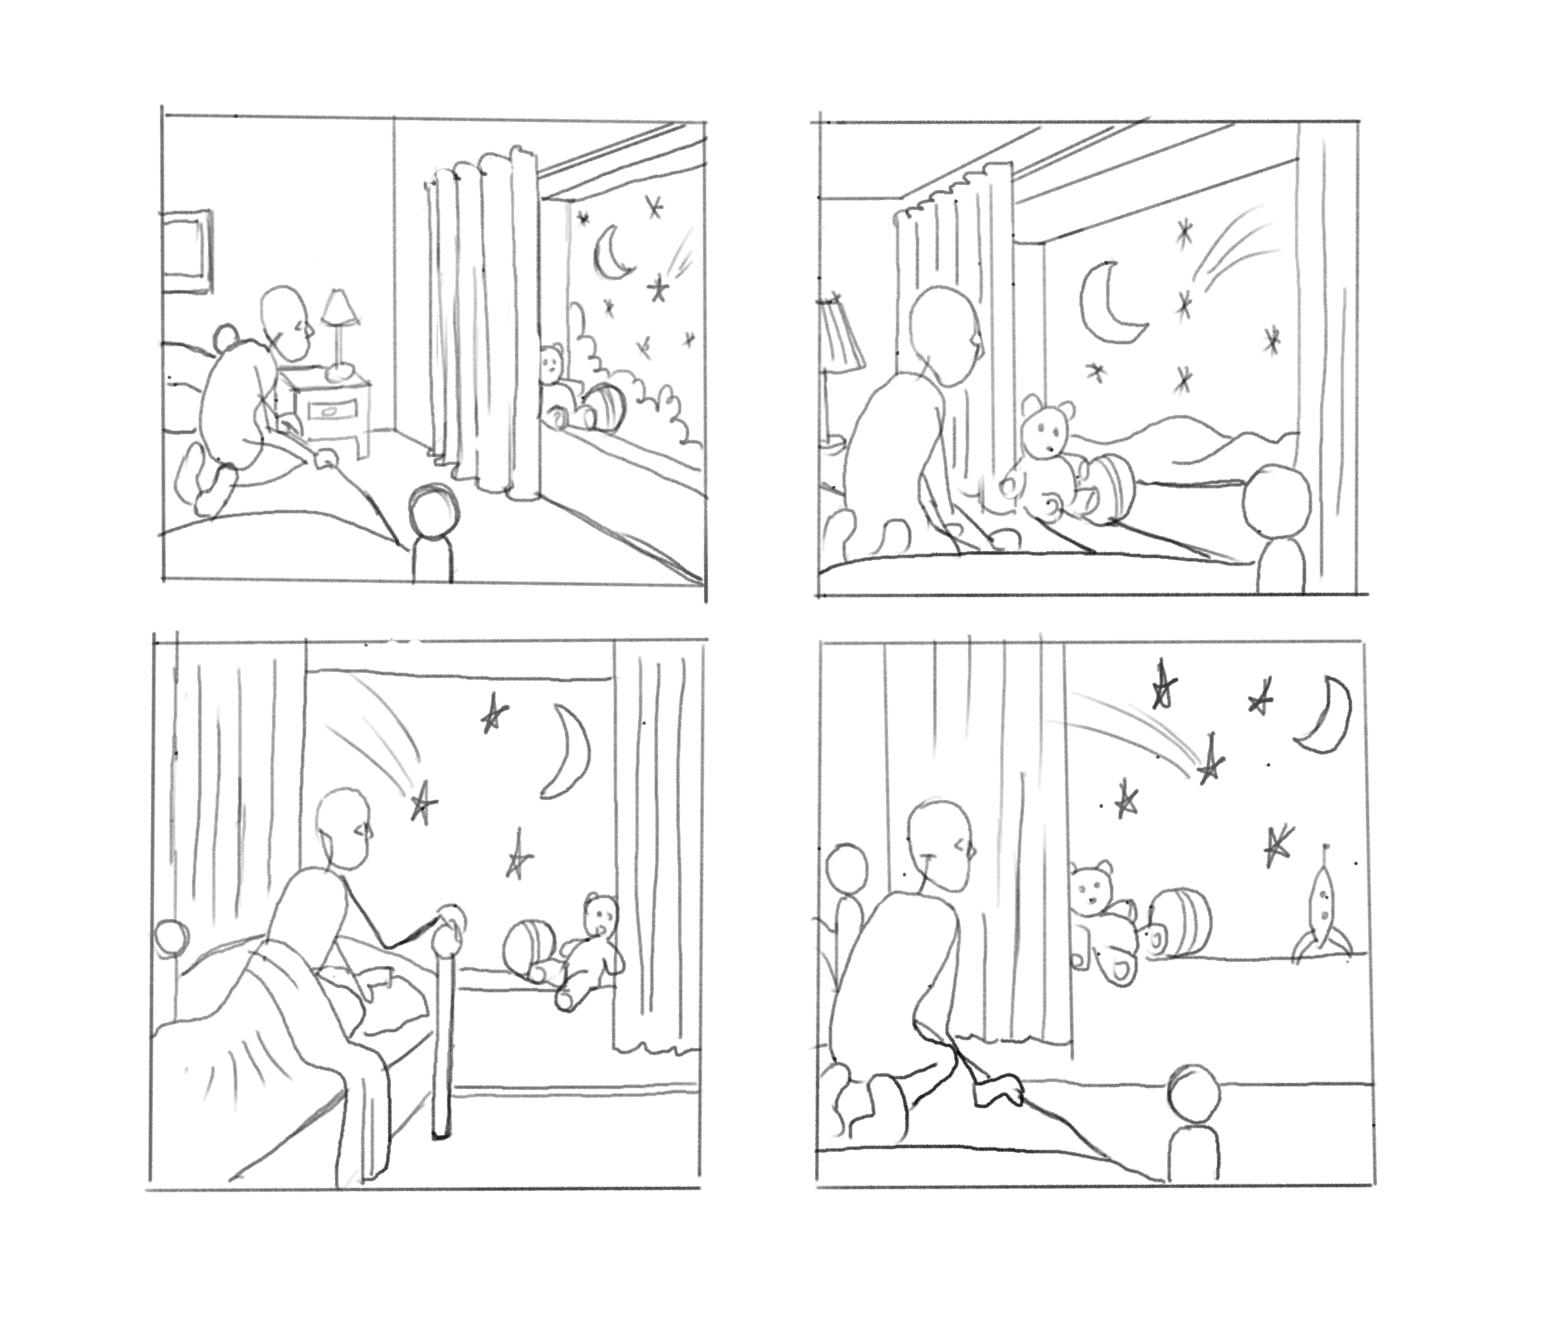 thumbnails for inner title page.jpg